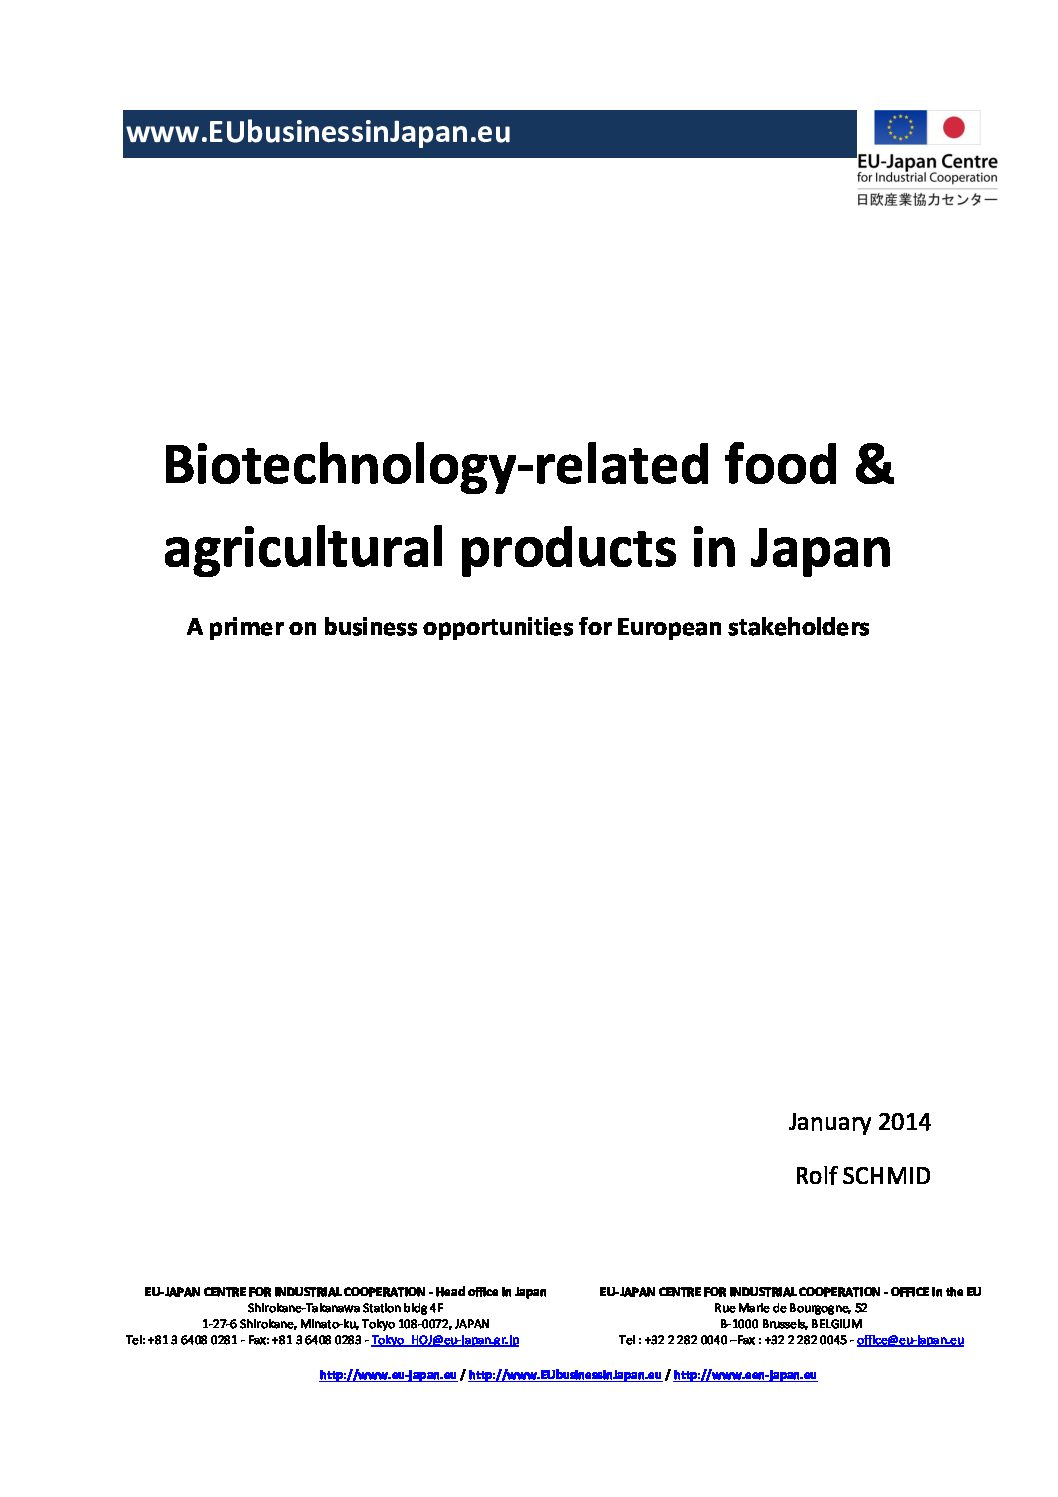 Biotechnology-related food & agricultural products in Japan